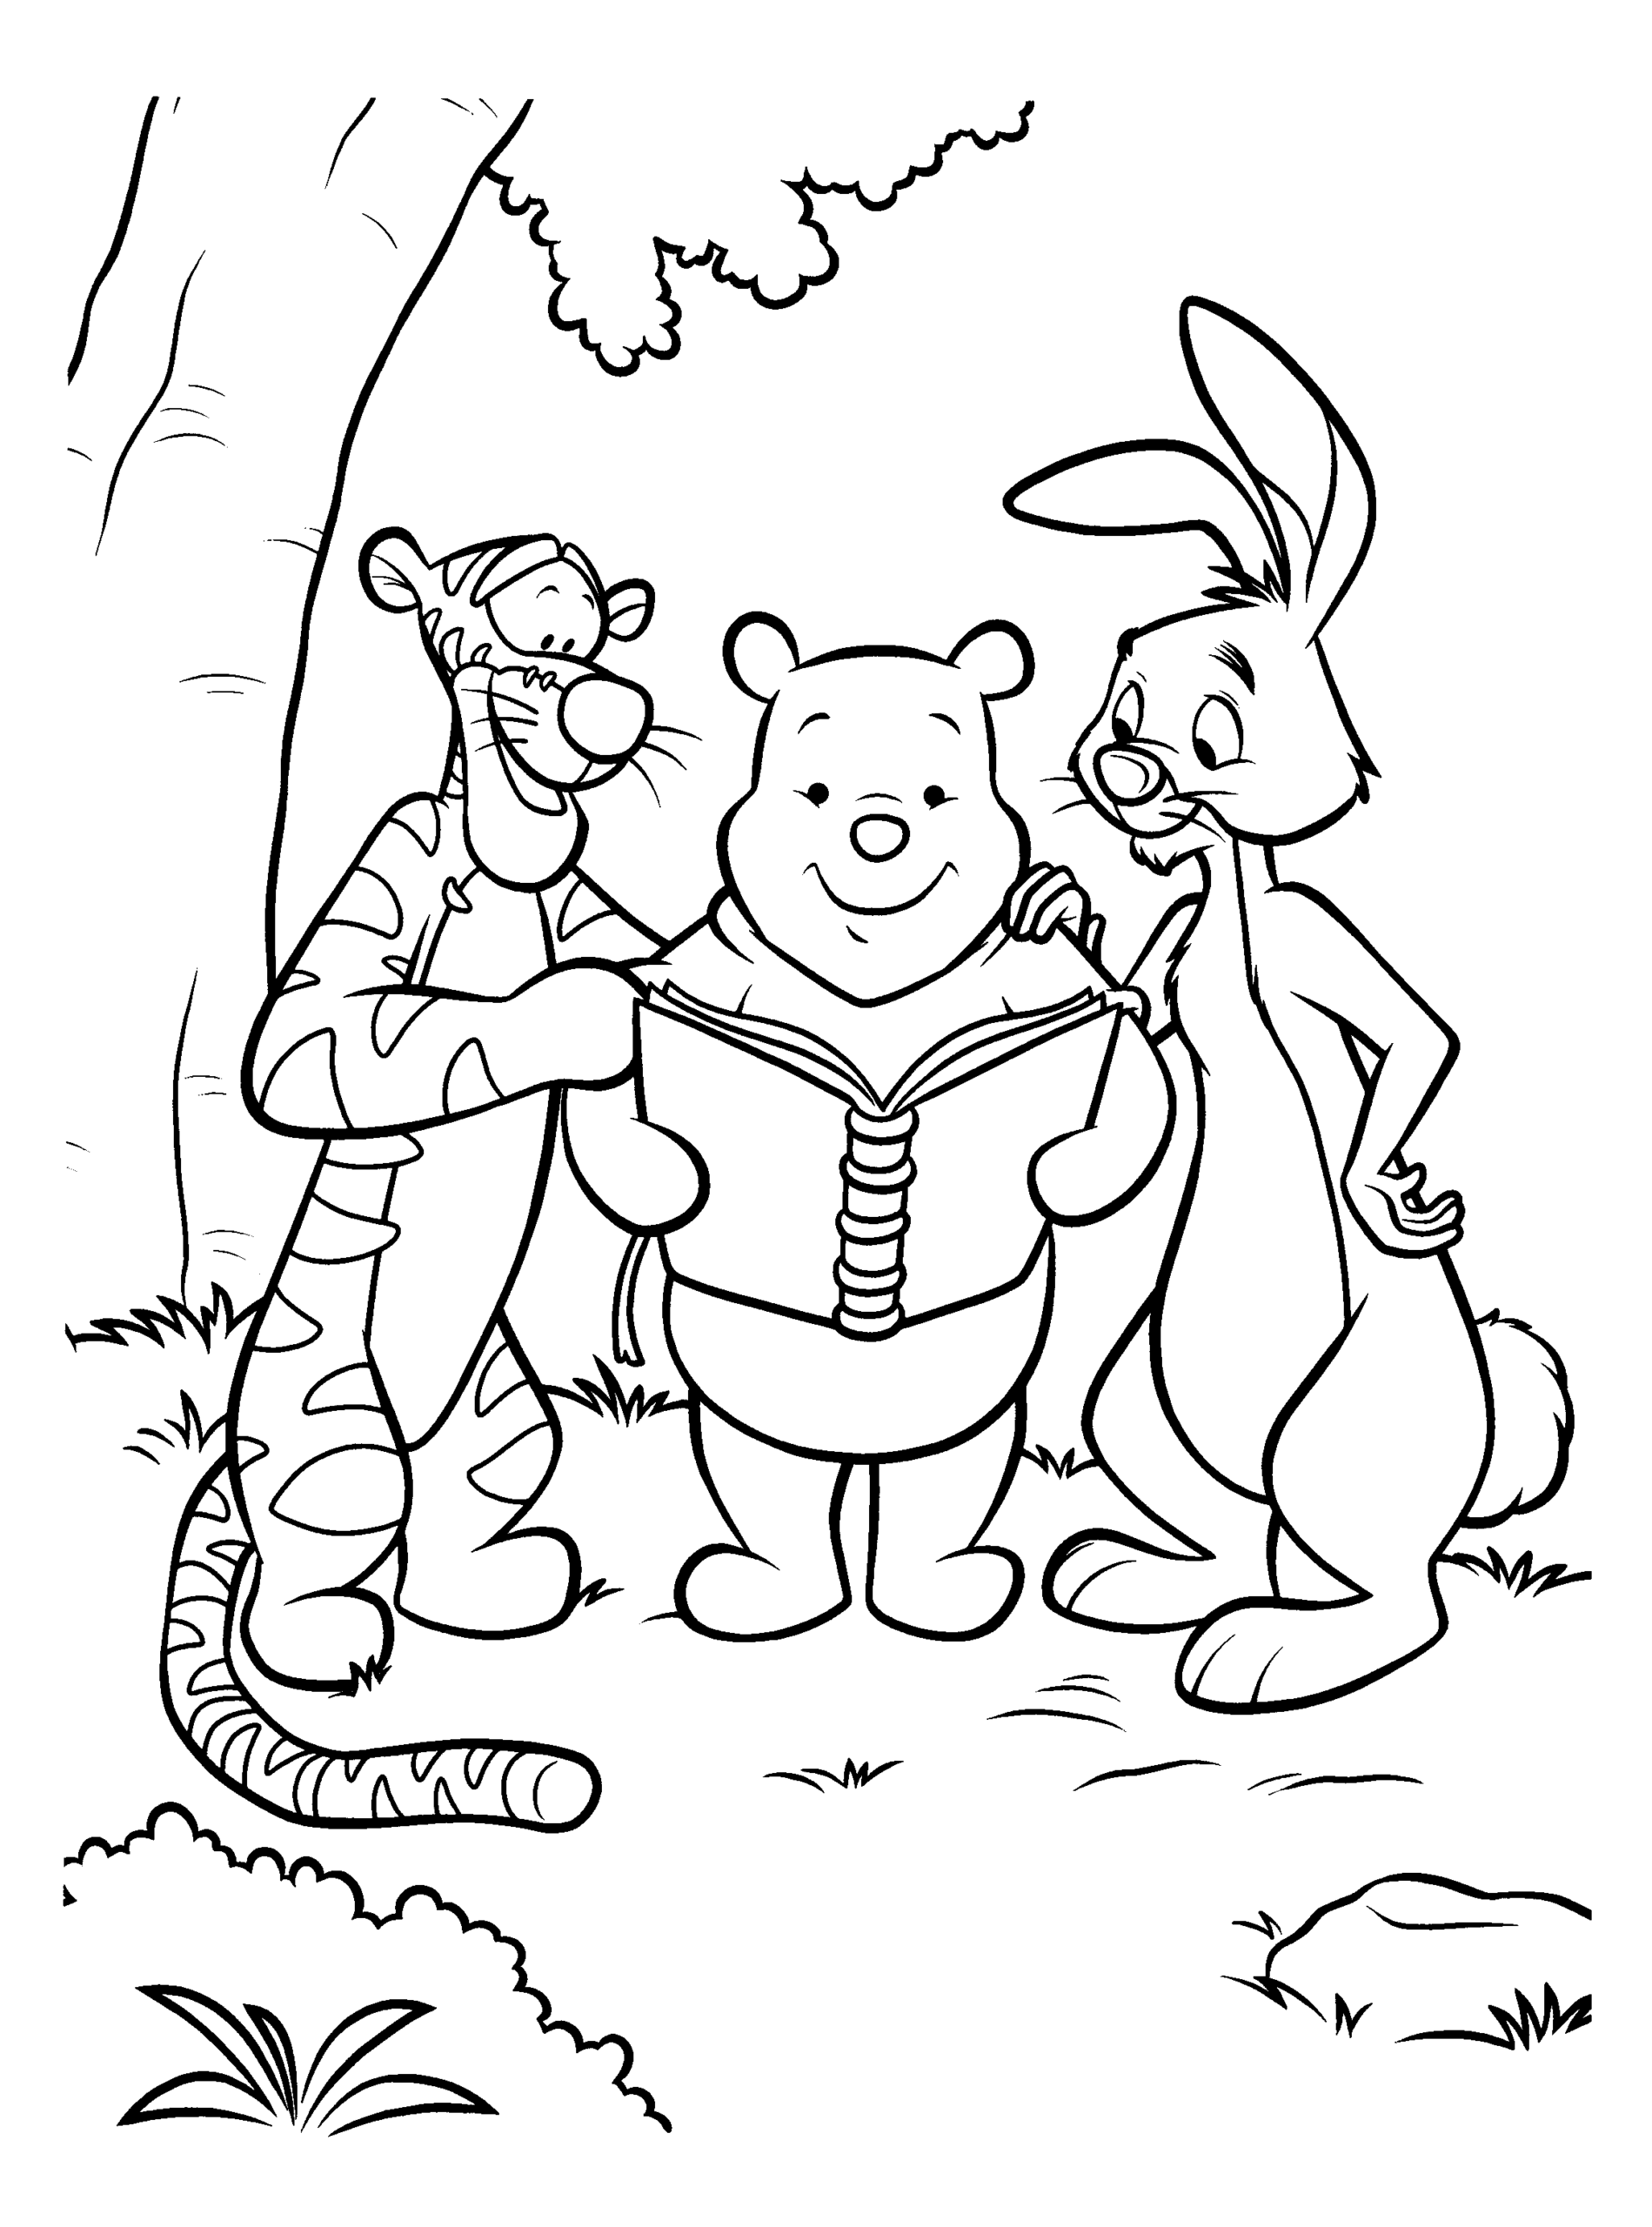 Winnie the Pooh Coloring Pages Cartoons winnie the pooh 22 Printable 2020 7121 Coloring4free